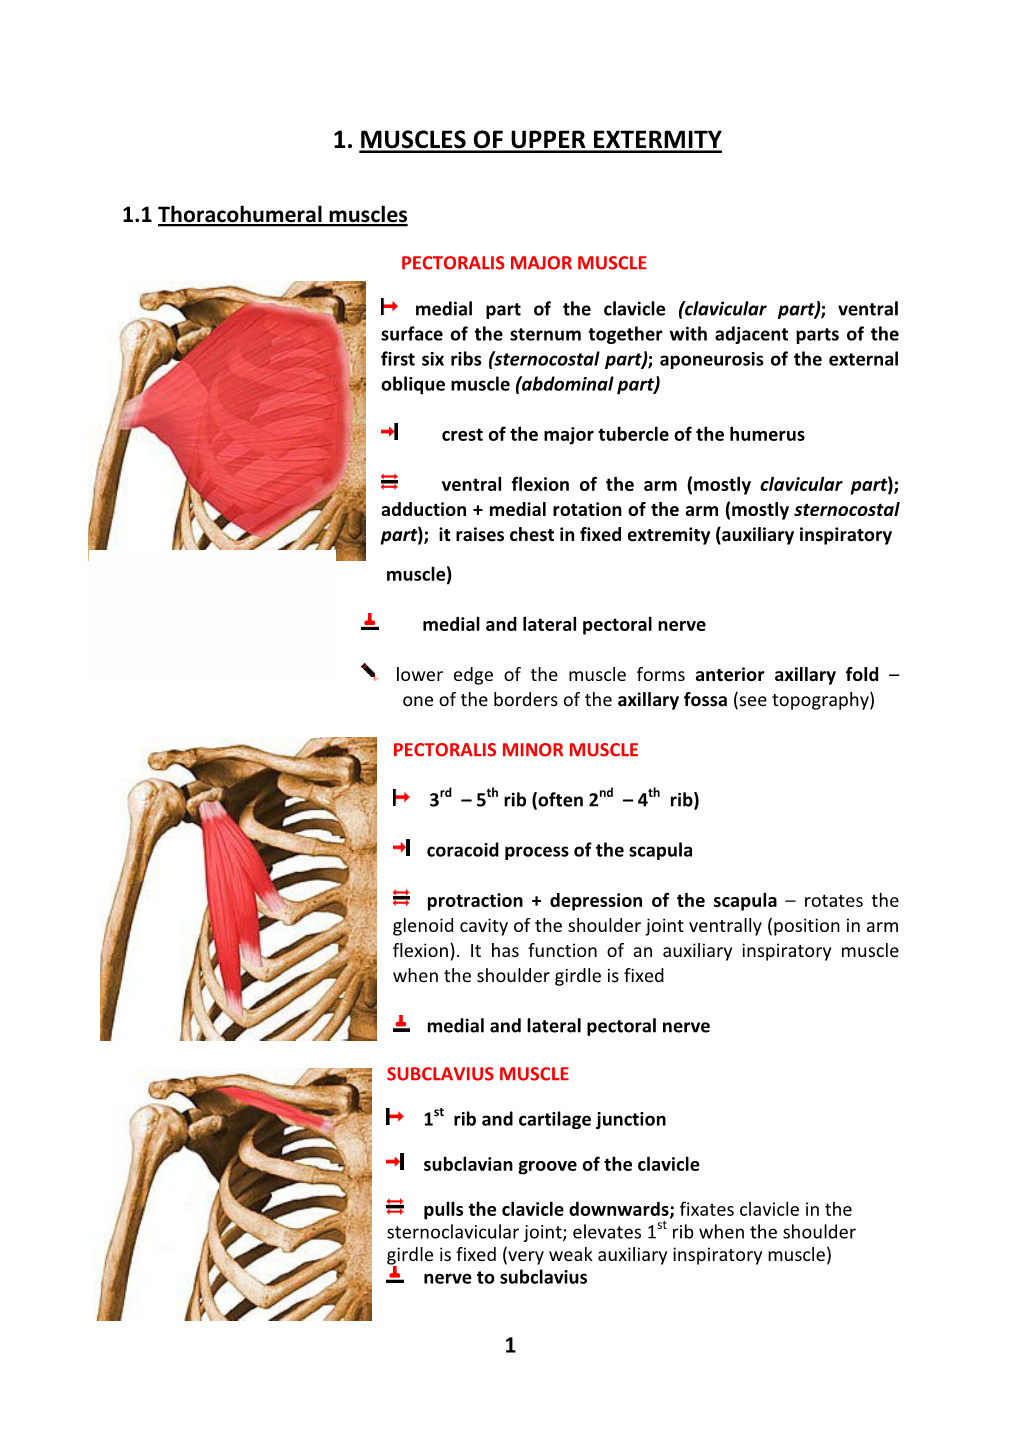 1. Muscles of Upper Extermity